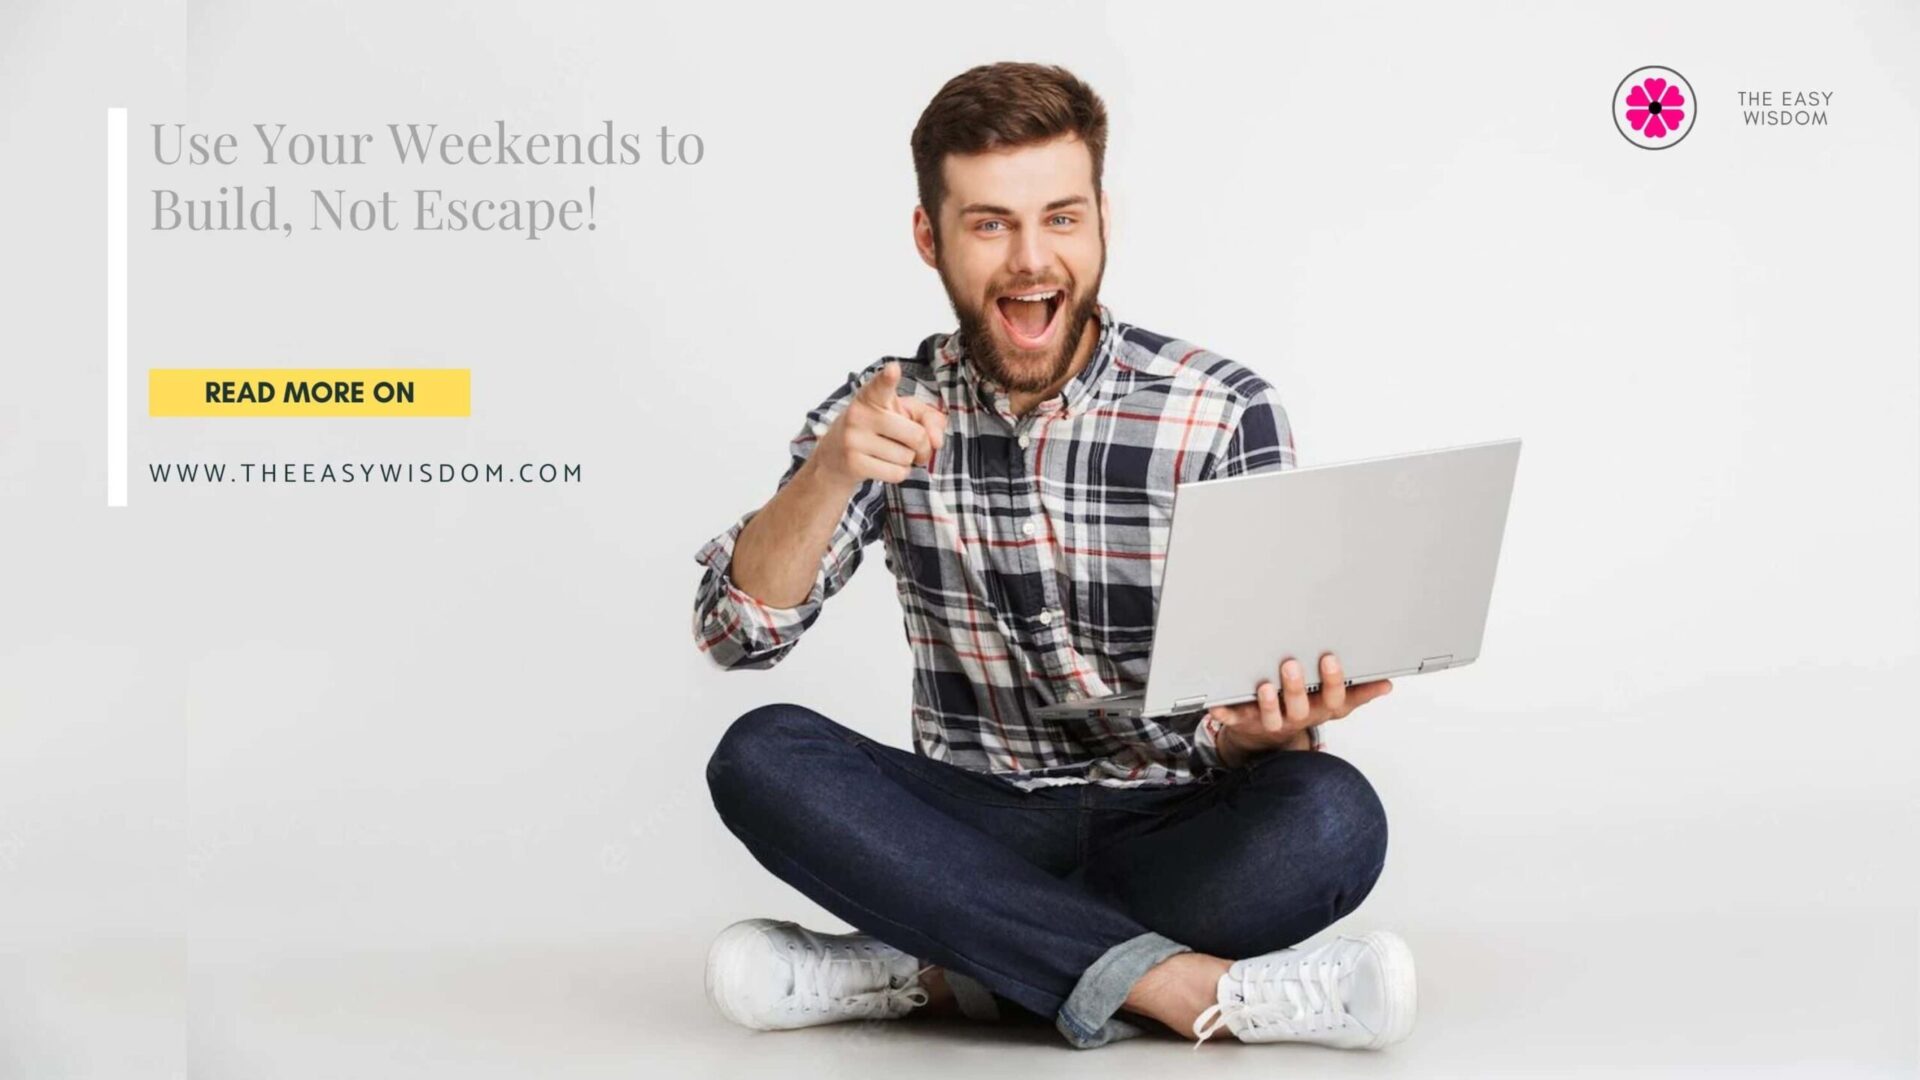 Use weekends to build, not escape! How to spend your weekend wisely? www.theeasywisdom.com